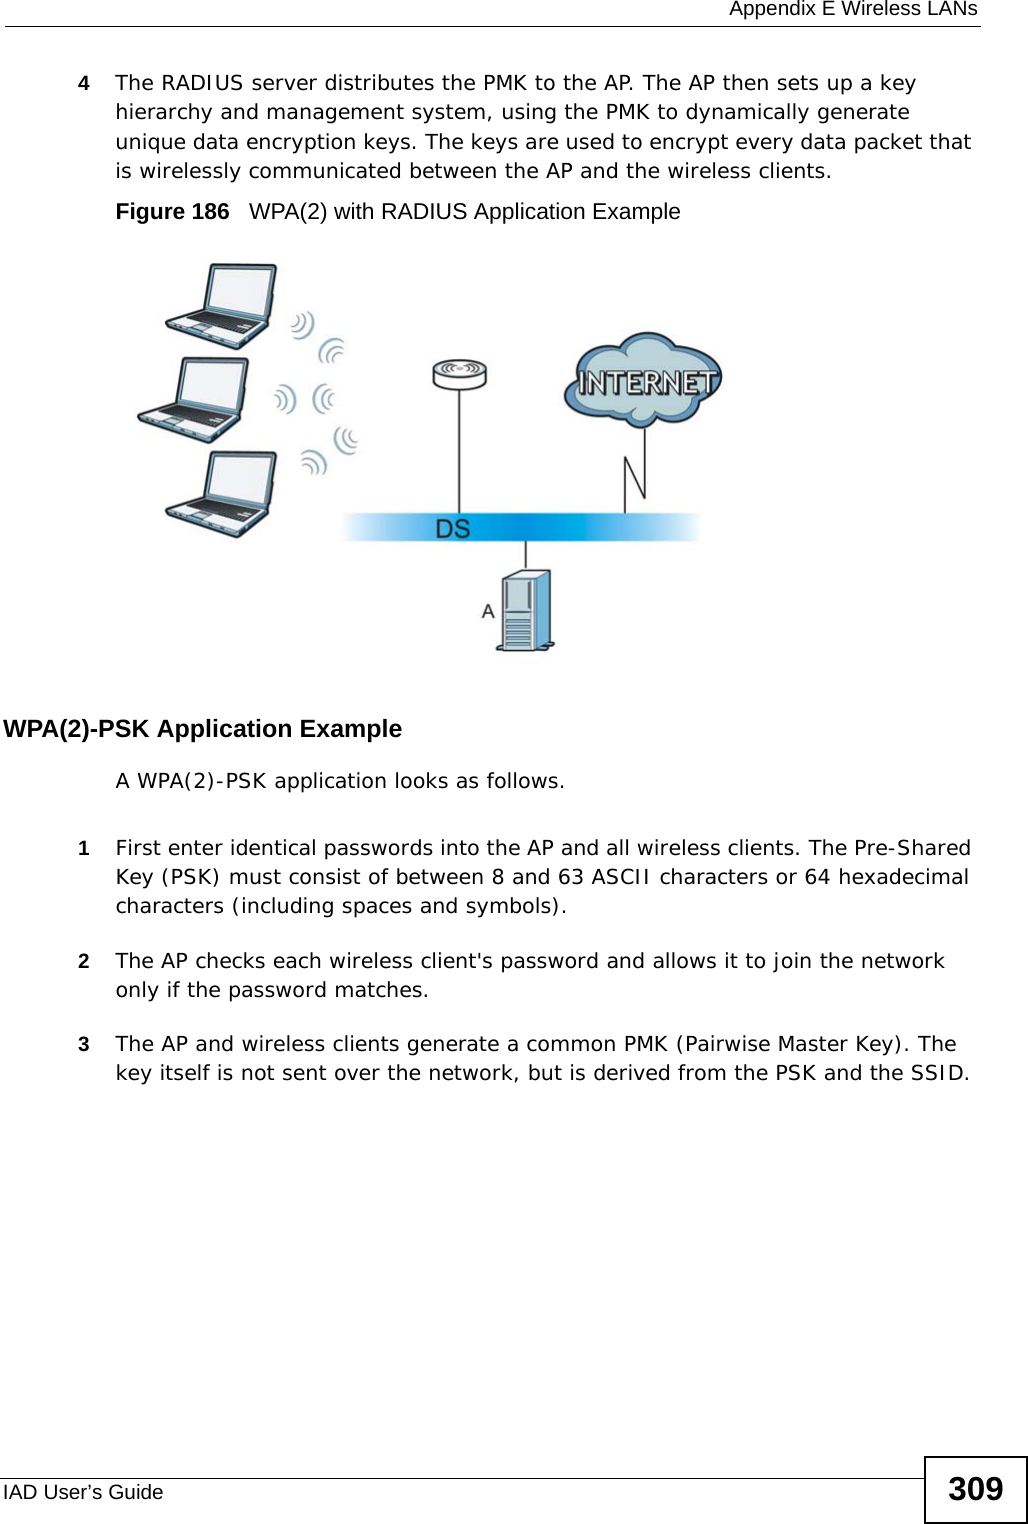  Appendix E Wireless LANsIAD User’s Guide 3094The RADIUS server distributes the PMK to the AP. The AP then sets up a key hierarchy and management system, using the PMK to dynamically generate unique data encryption keys. The keys are used to encrypt every data packet that is wirelessly communicated between the AP and the wireless clients.Figure 186   WPA(2) with RADIUS Application ExampleWPA(2)-PSK Application ExampleA WPA(2)-PSK application looks as follows.1First enter identical passwords into the AP and all wireless clients. The Pre-Shared Key (PSK) must consist of between 8 and 63 ASCII characters or 64 hexadecimal characters (including spaces and symbols).2The AP checks each wireless client&apos;s password and allows it to join the network only if the password matches.3The AP and wireless clients generate a common PMK (Pairwise Master Key). The key itself is not sent over the network, but is derived from the PSK and the SSID. 